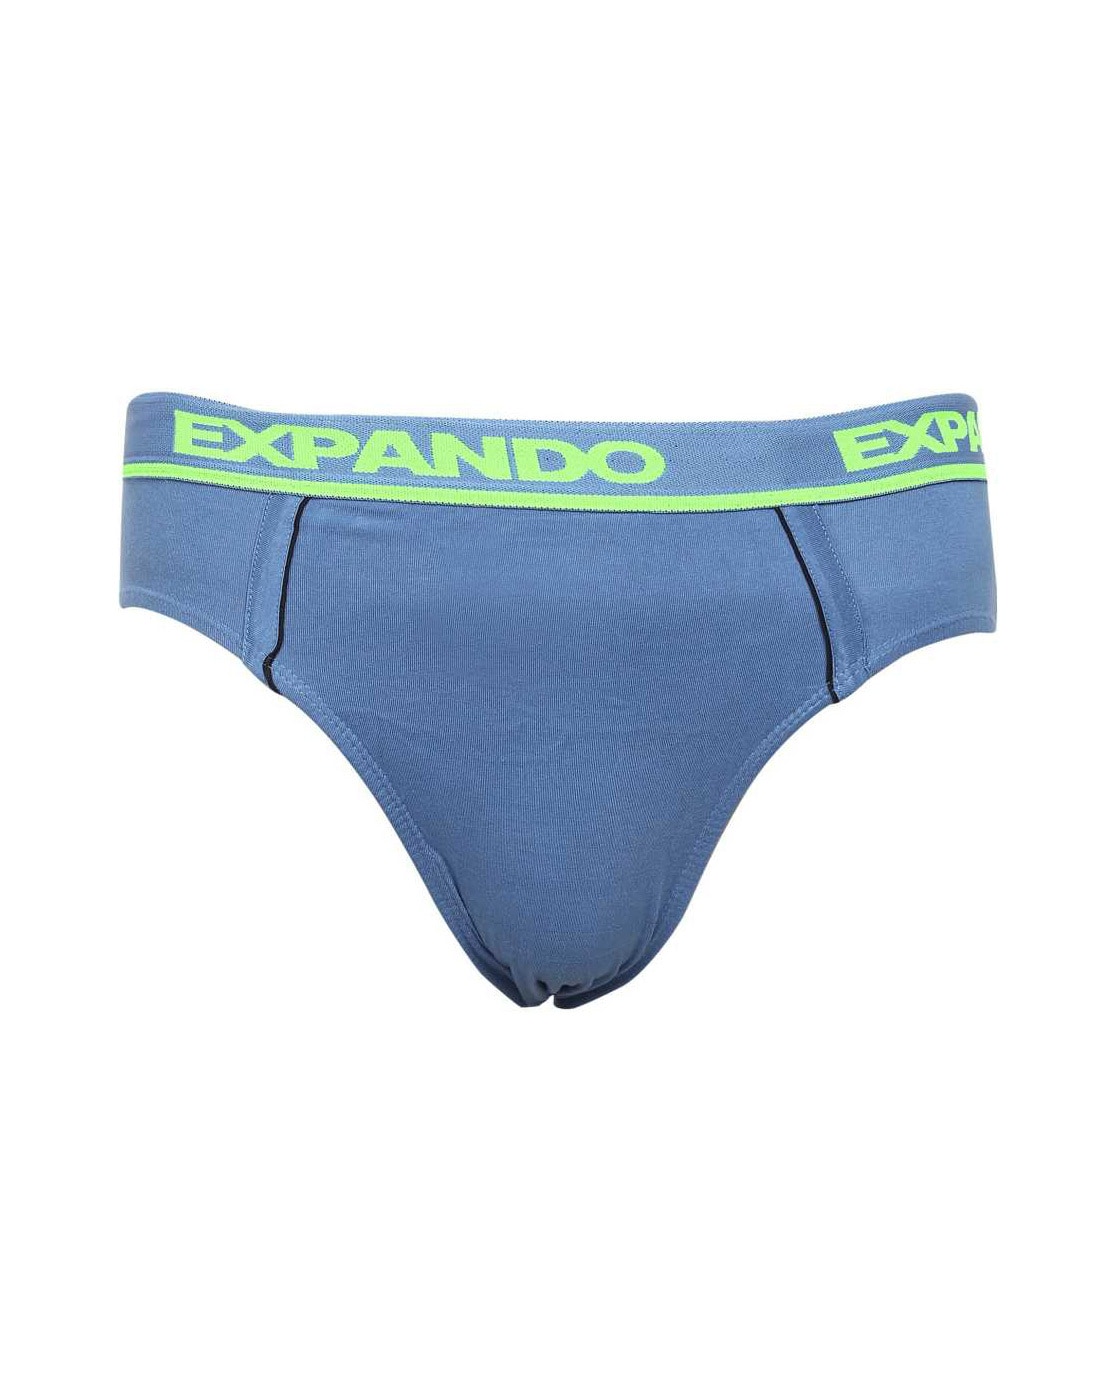 Rupa Expando Check Print Brief - Get Best Price from Manufacturers &  Suppliers in India